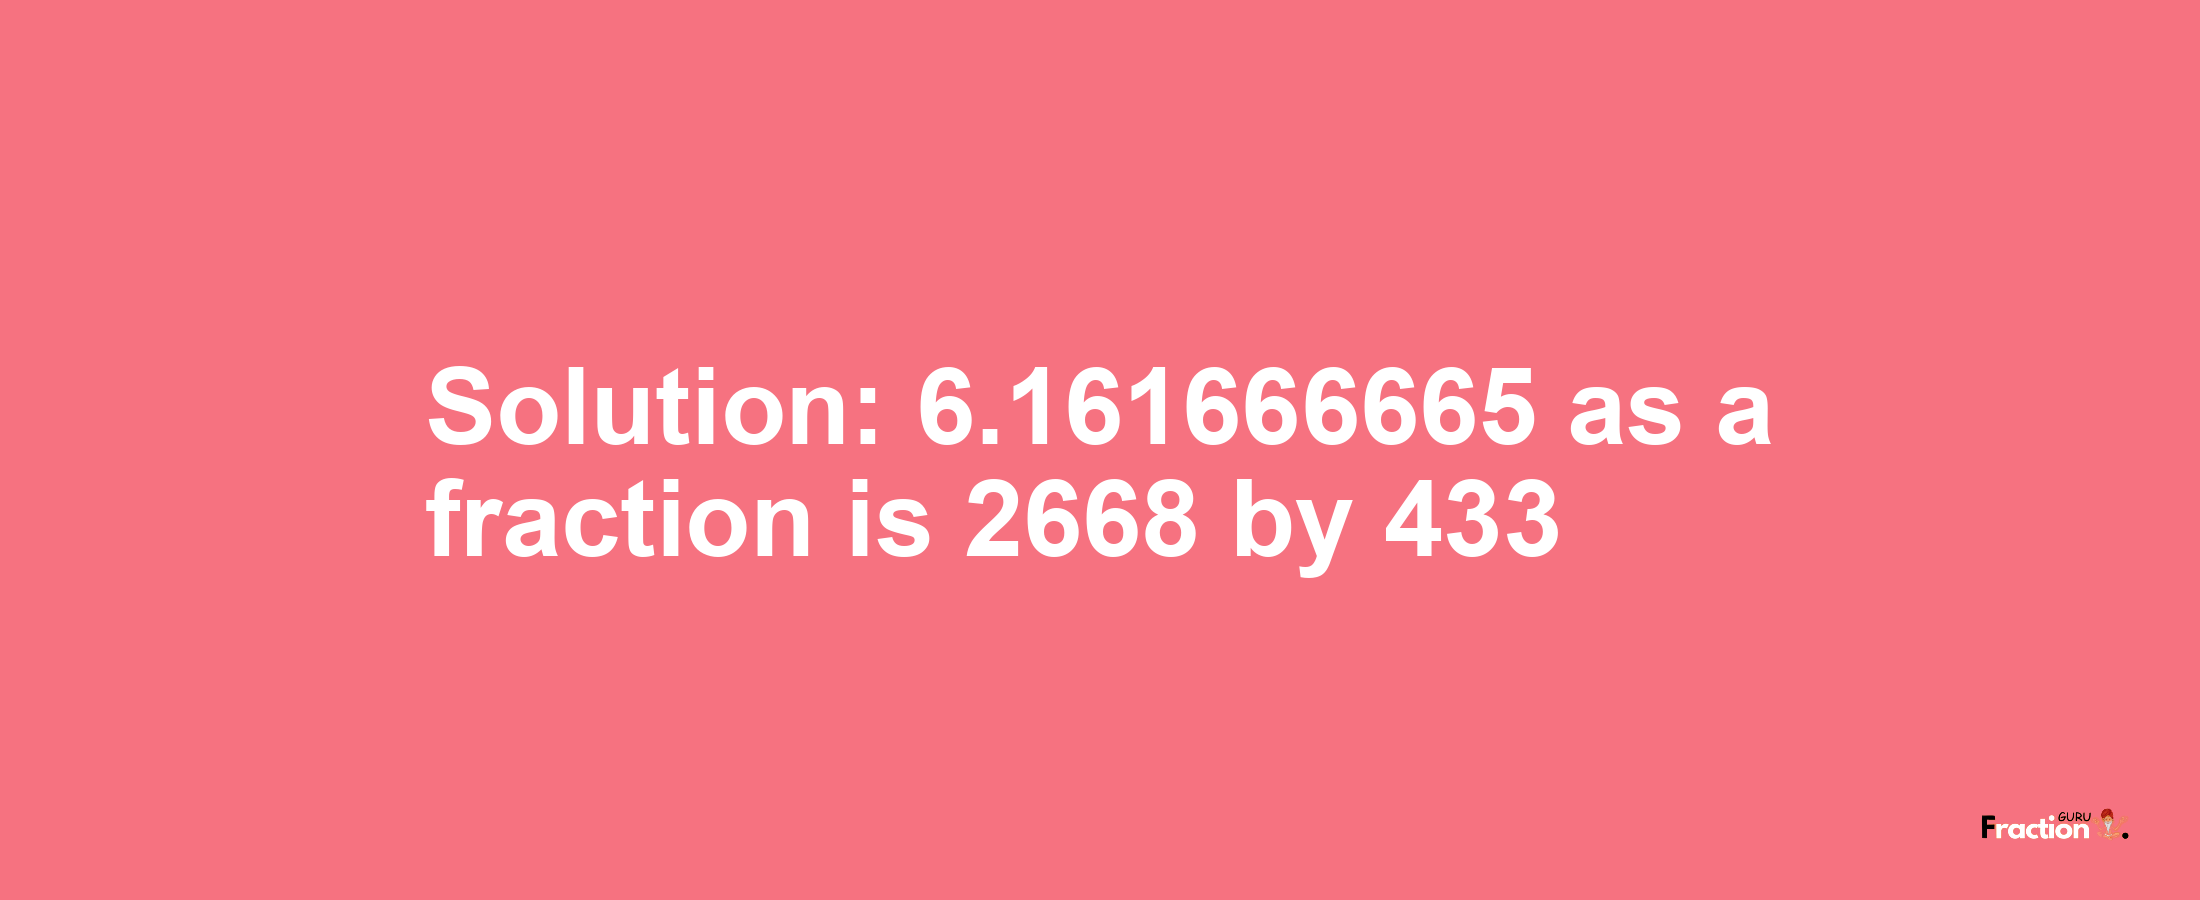 Solution:6.161666665 as a fraction is 2668/433